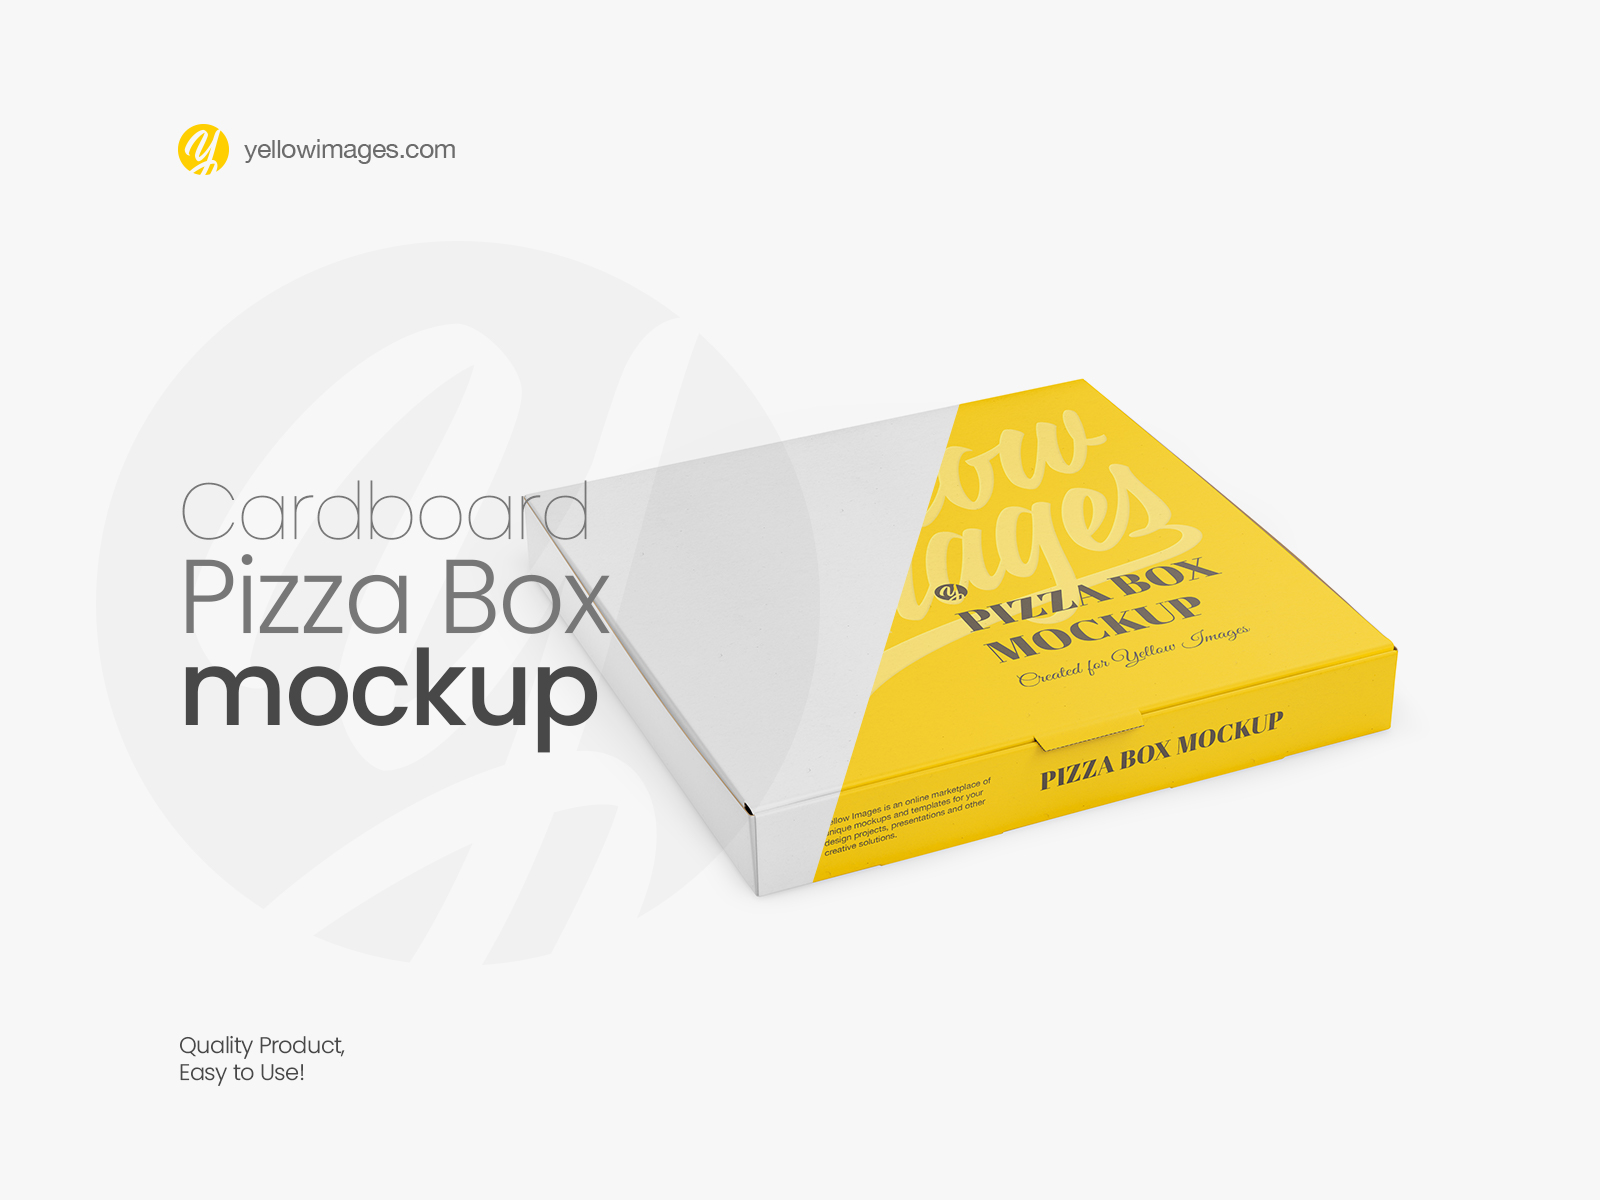 Download Creating Mockup In Photoshop Download Free And Premium Psd Mockup Templates And Design Assets Yellowimages Mockups